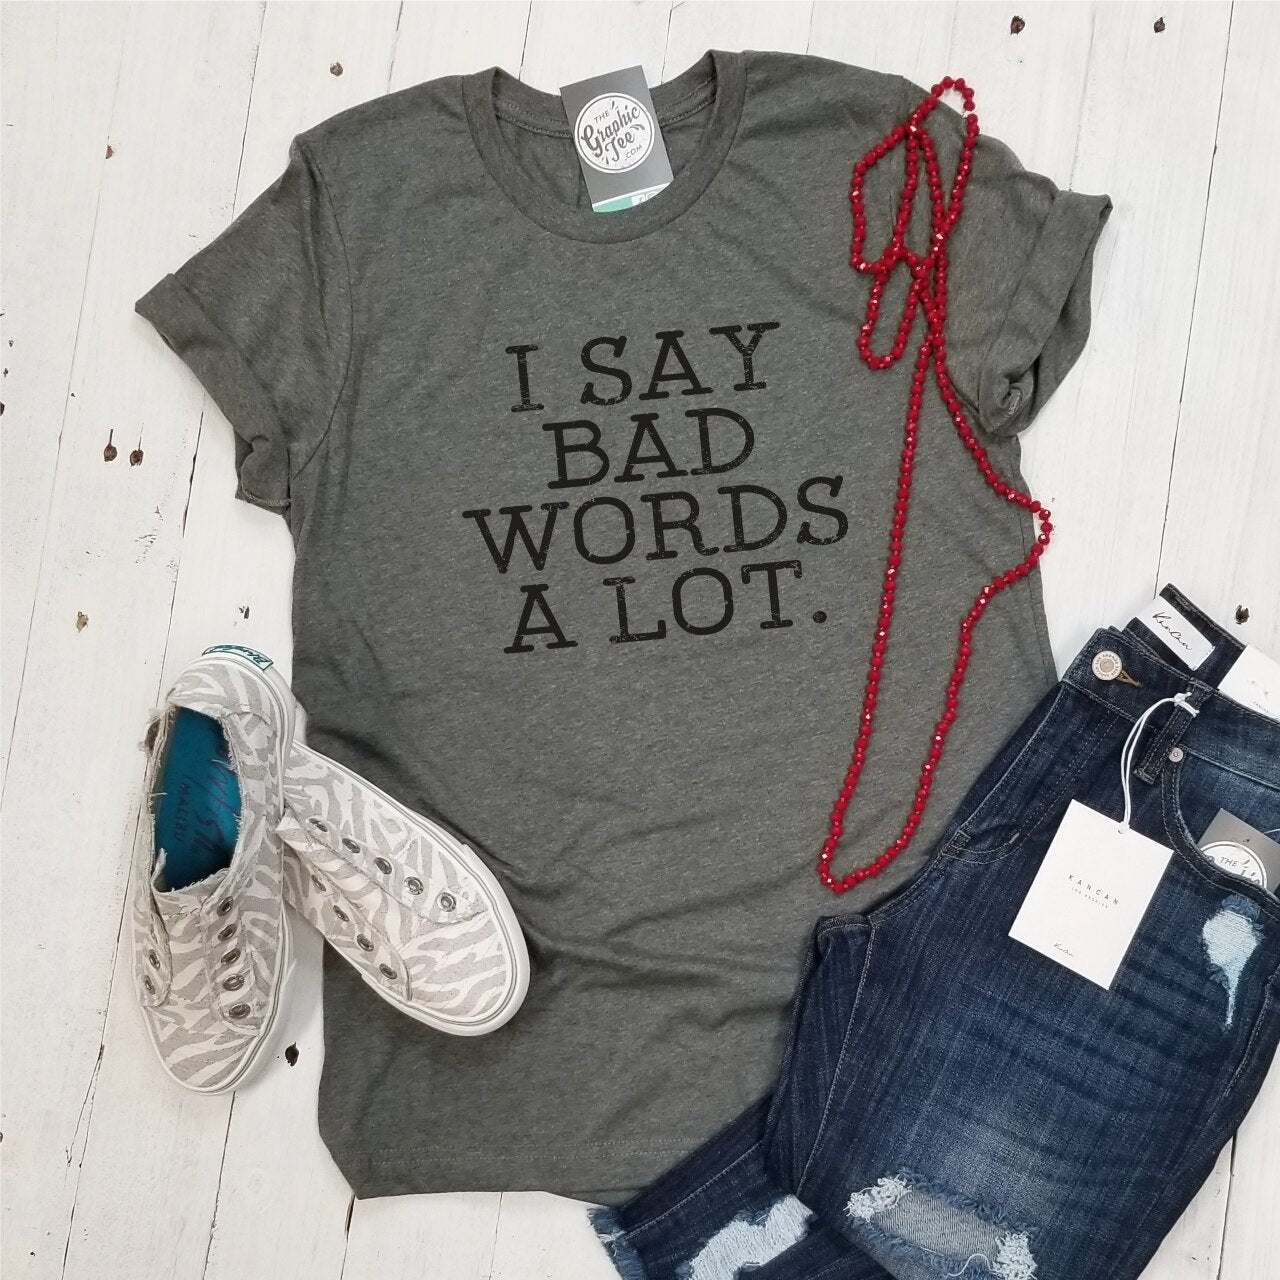 I Say Bad Words A Lot. - Unisex Tee - The Graphic Tee